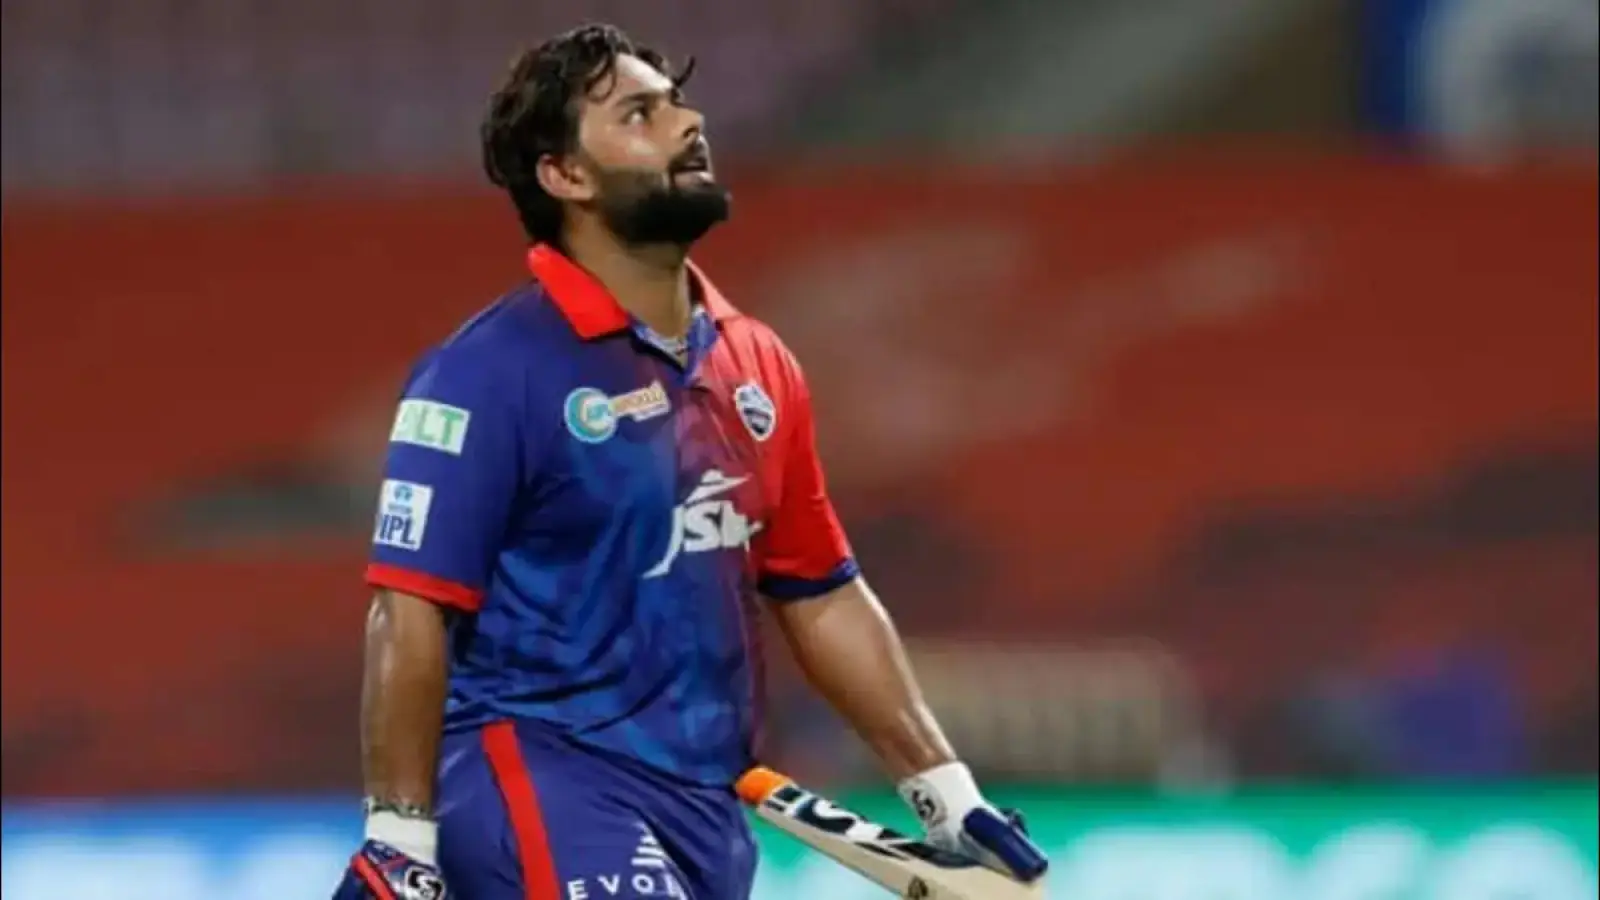 Even after losing badly to KKR, Rishabh Pant did not accept his mistake, blamed him